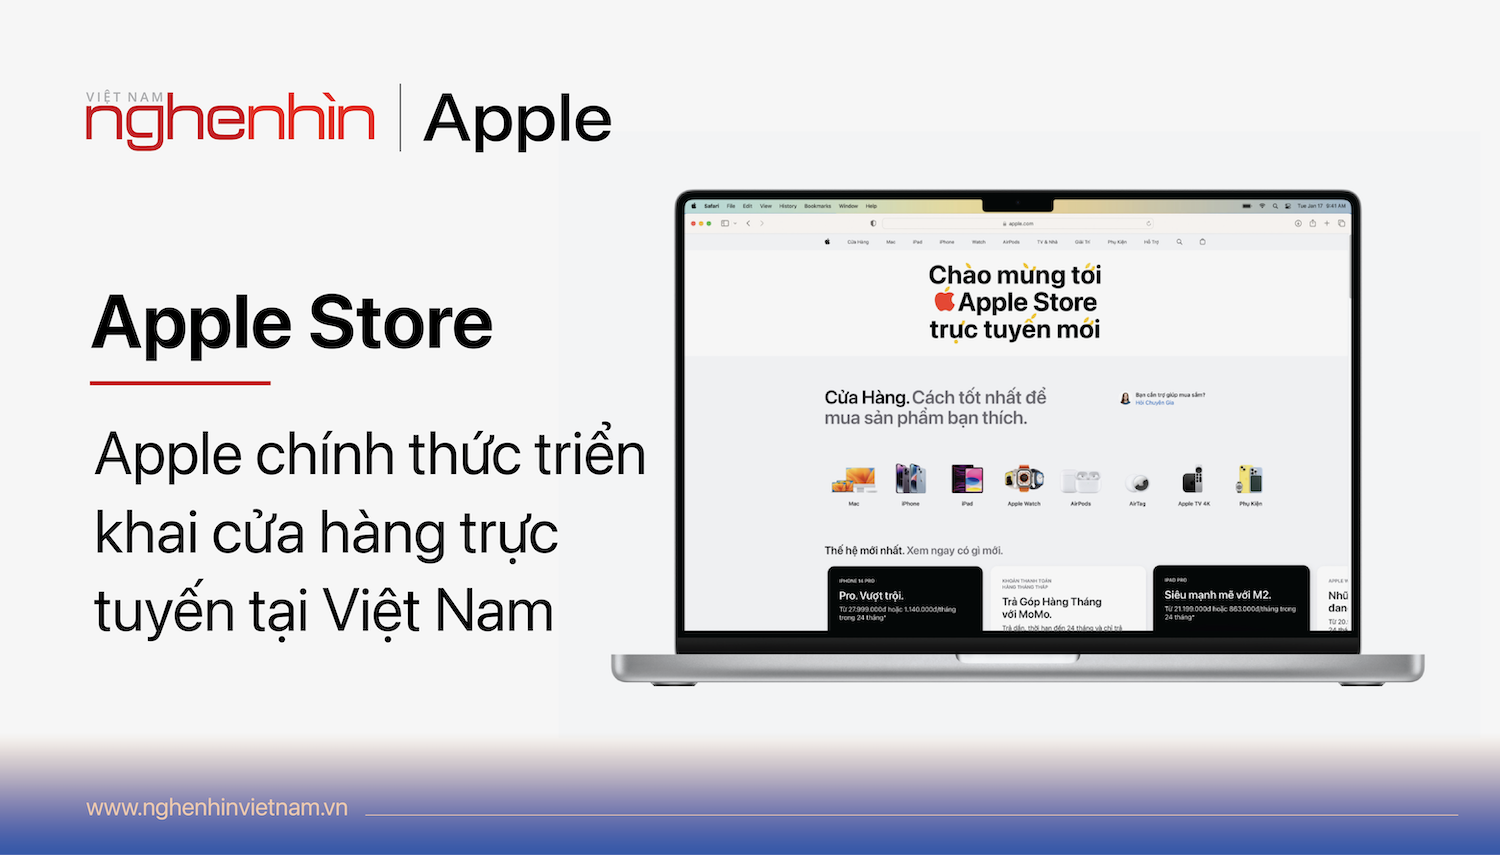 apple-store-truc-tuyen-chinh-thuc-hoat-dong-1.png (376 KB)